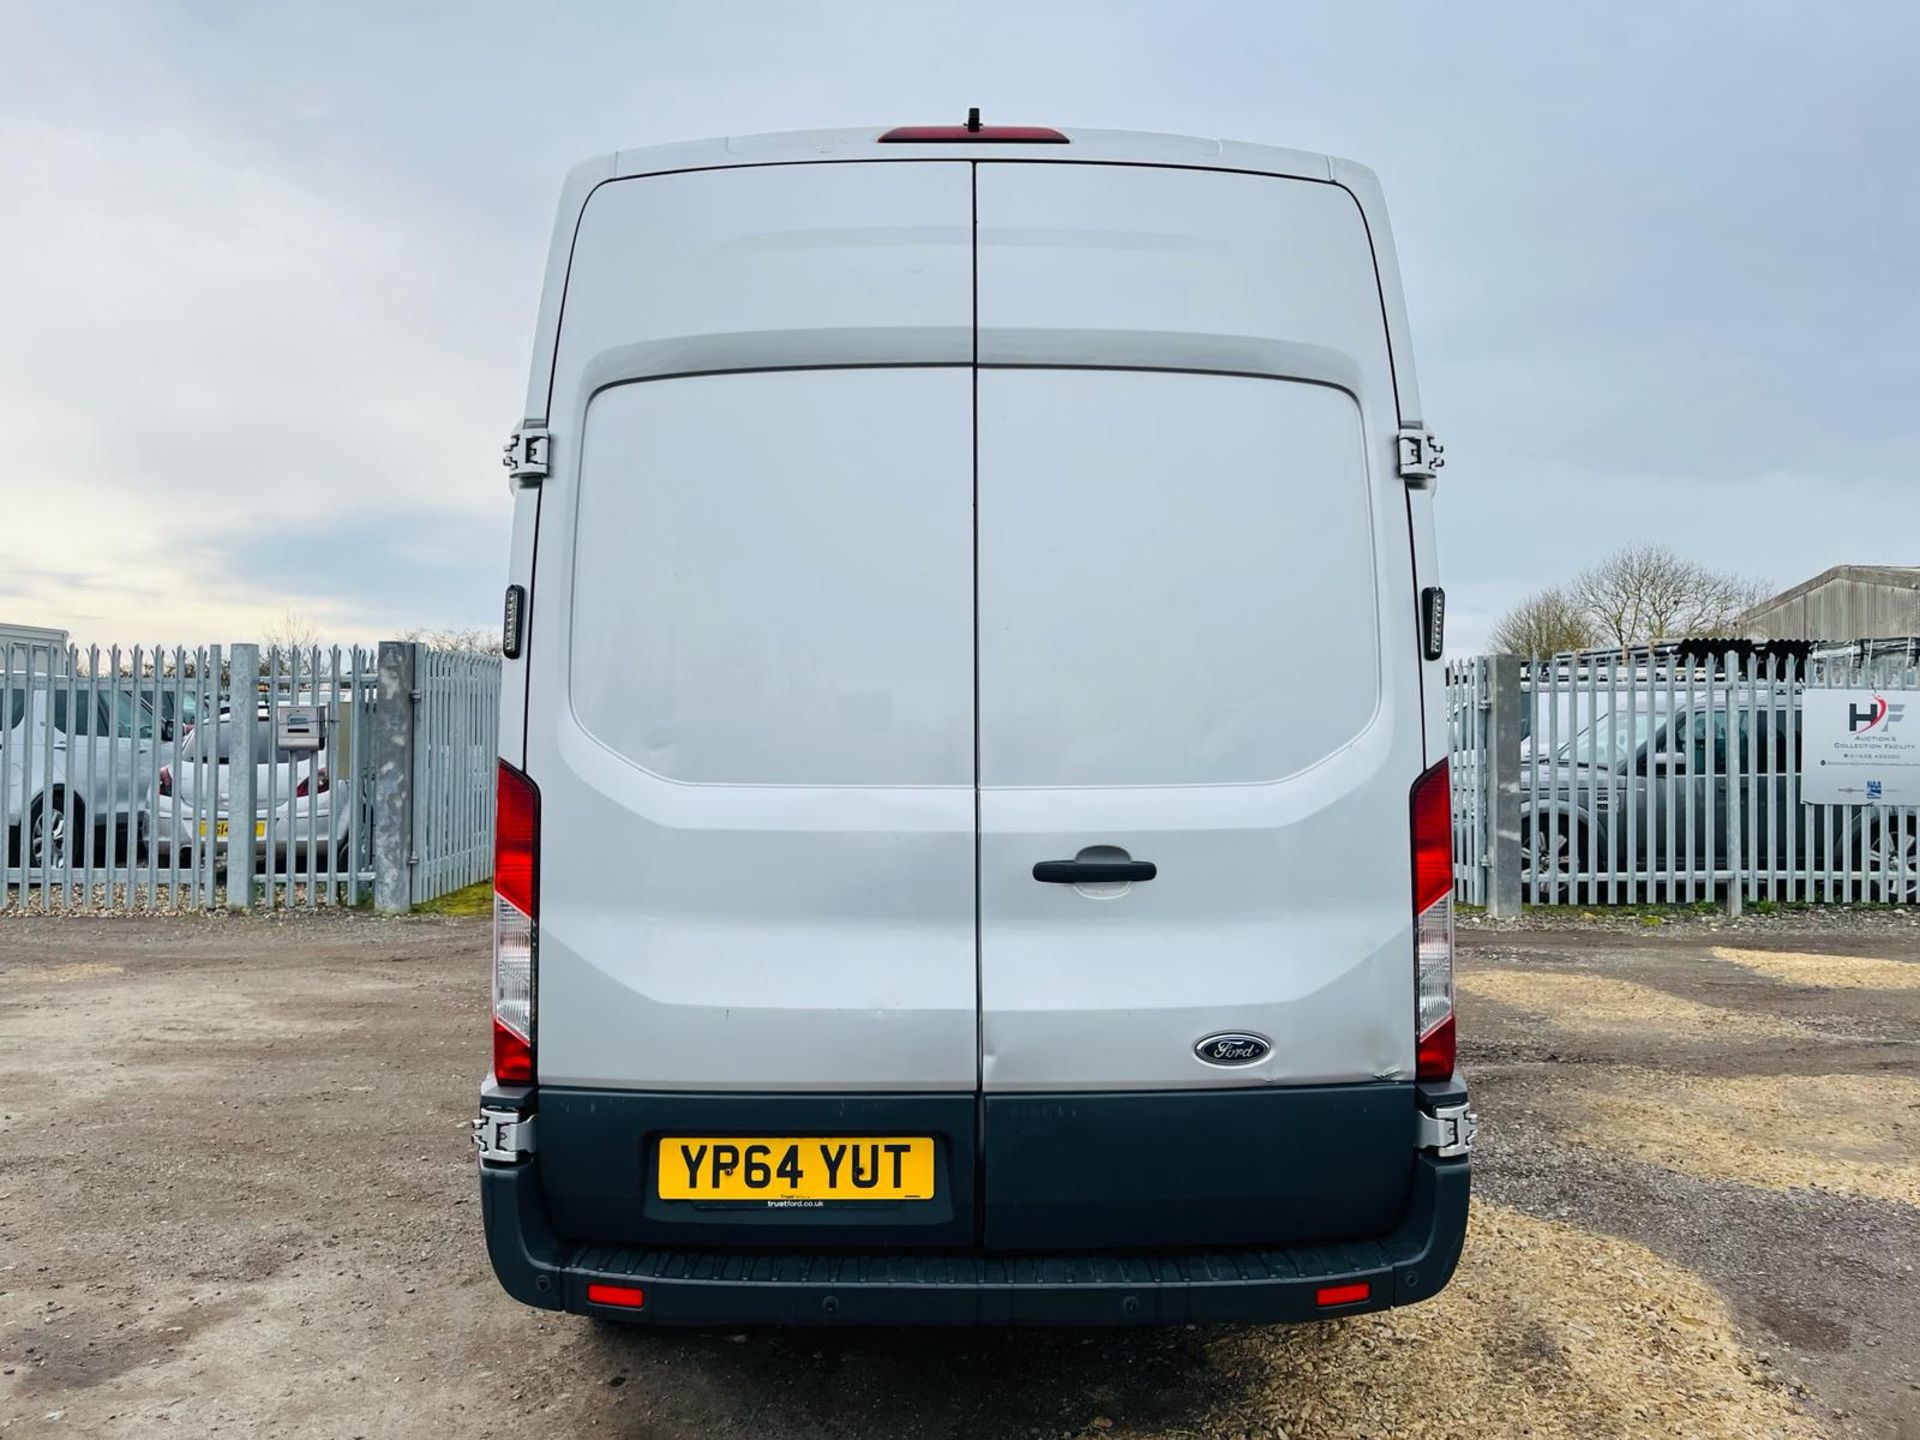 ** ON SALE ** Ford Transit Trend 350 TDCI 125 2.2 L3 H3 2014 '64 Reg' - Parking sensors - Air Con - Image 9 of 27